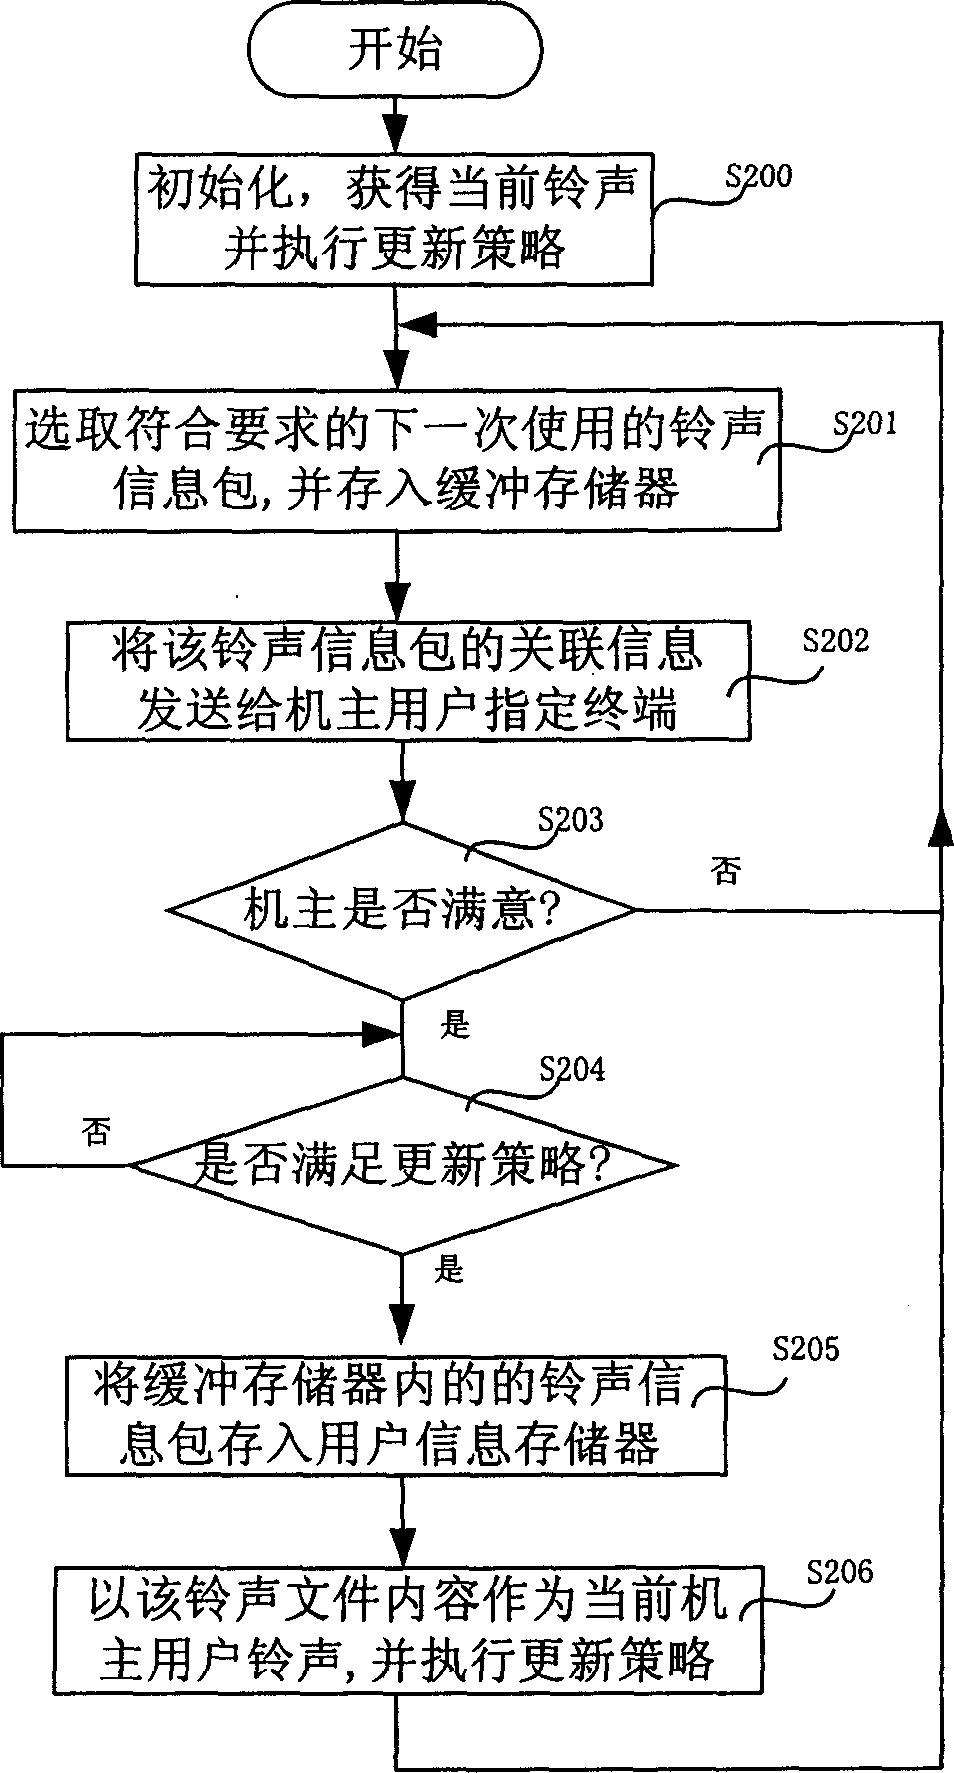 Dynamic information interactive system and method based on personalized ring back tone service